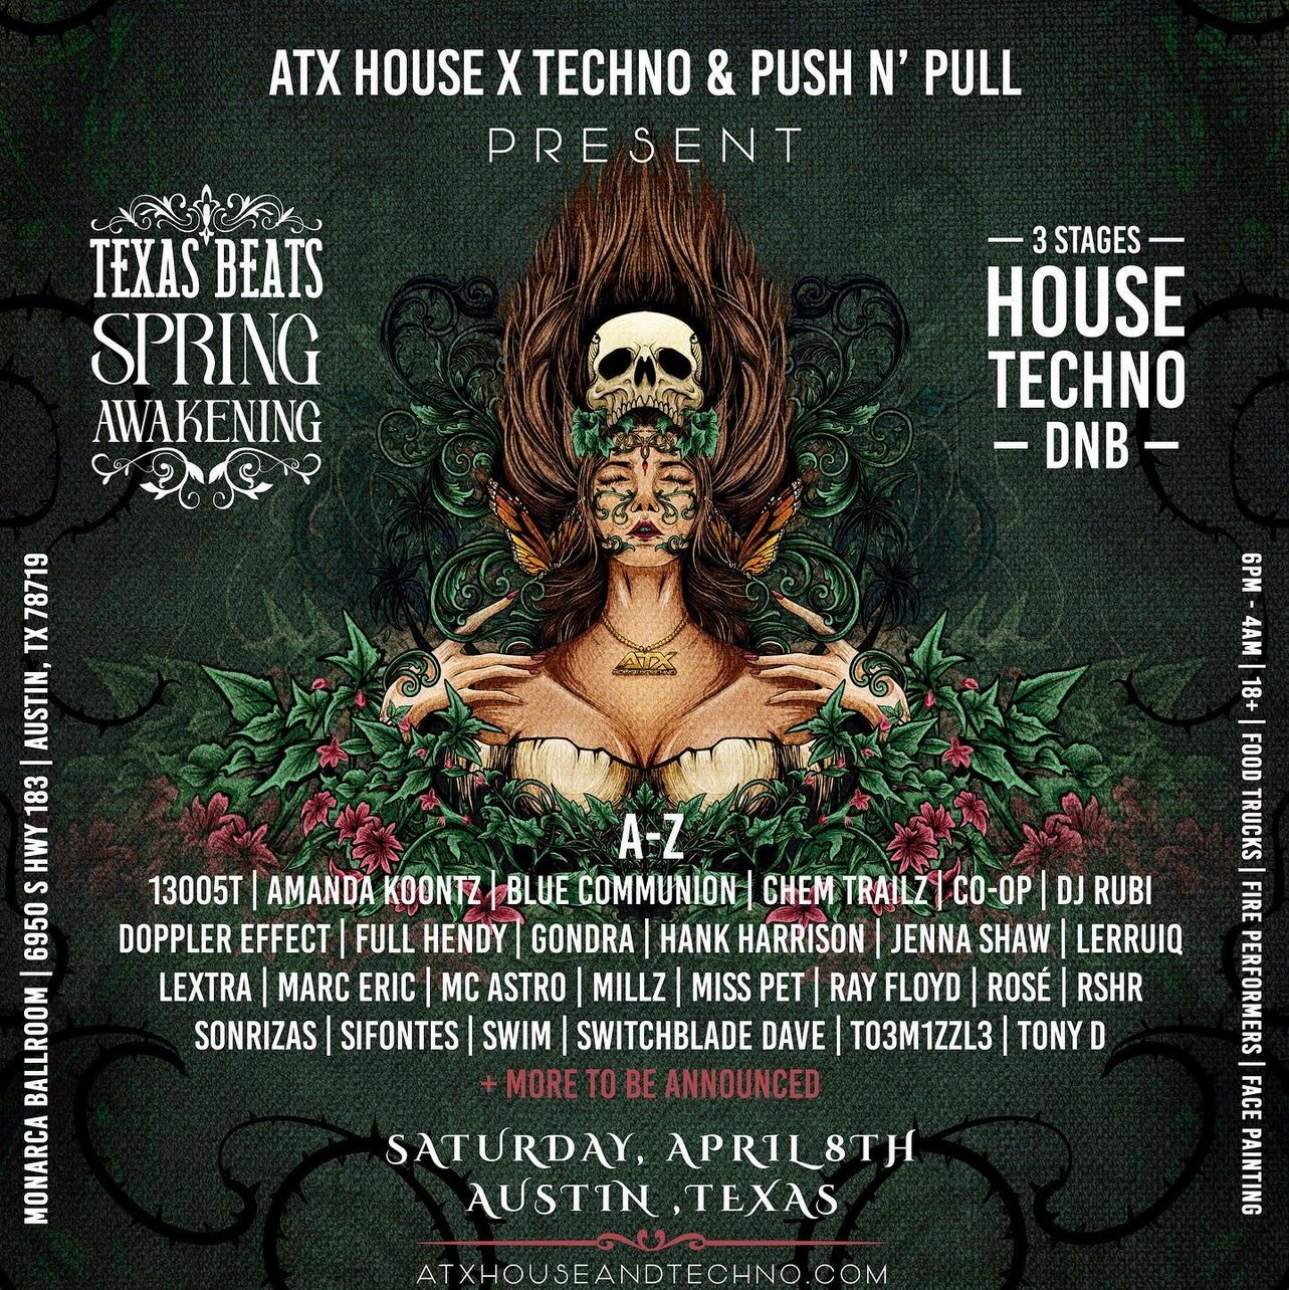 ATX HOUSE AND TECHNO - フライヤー表